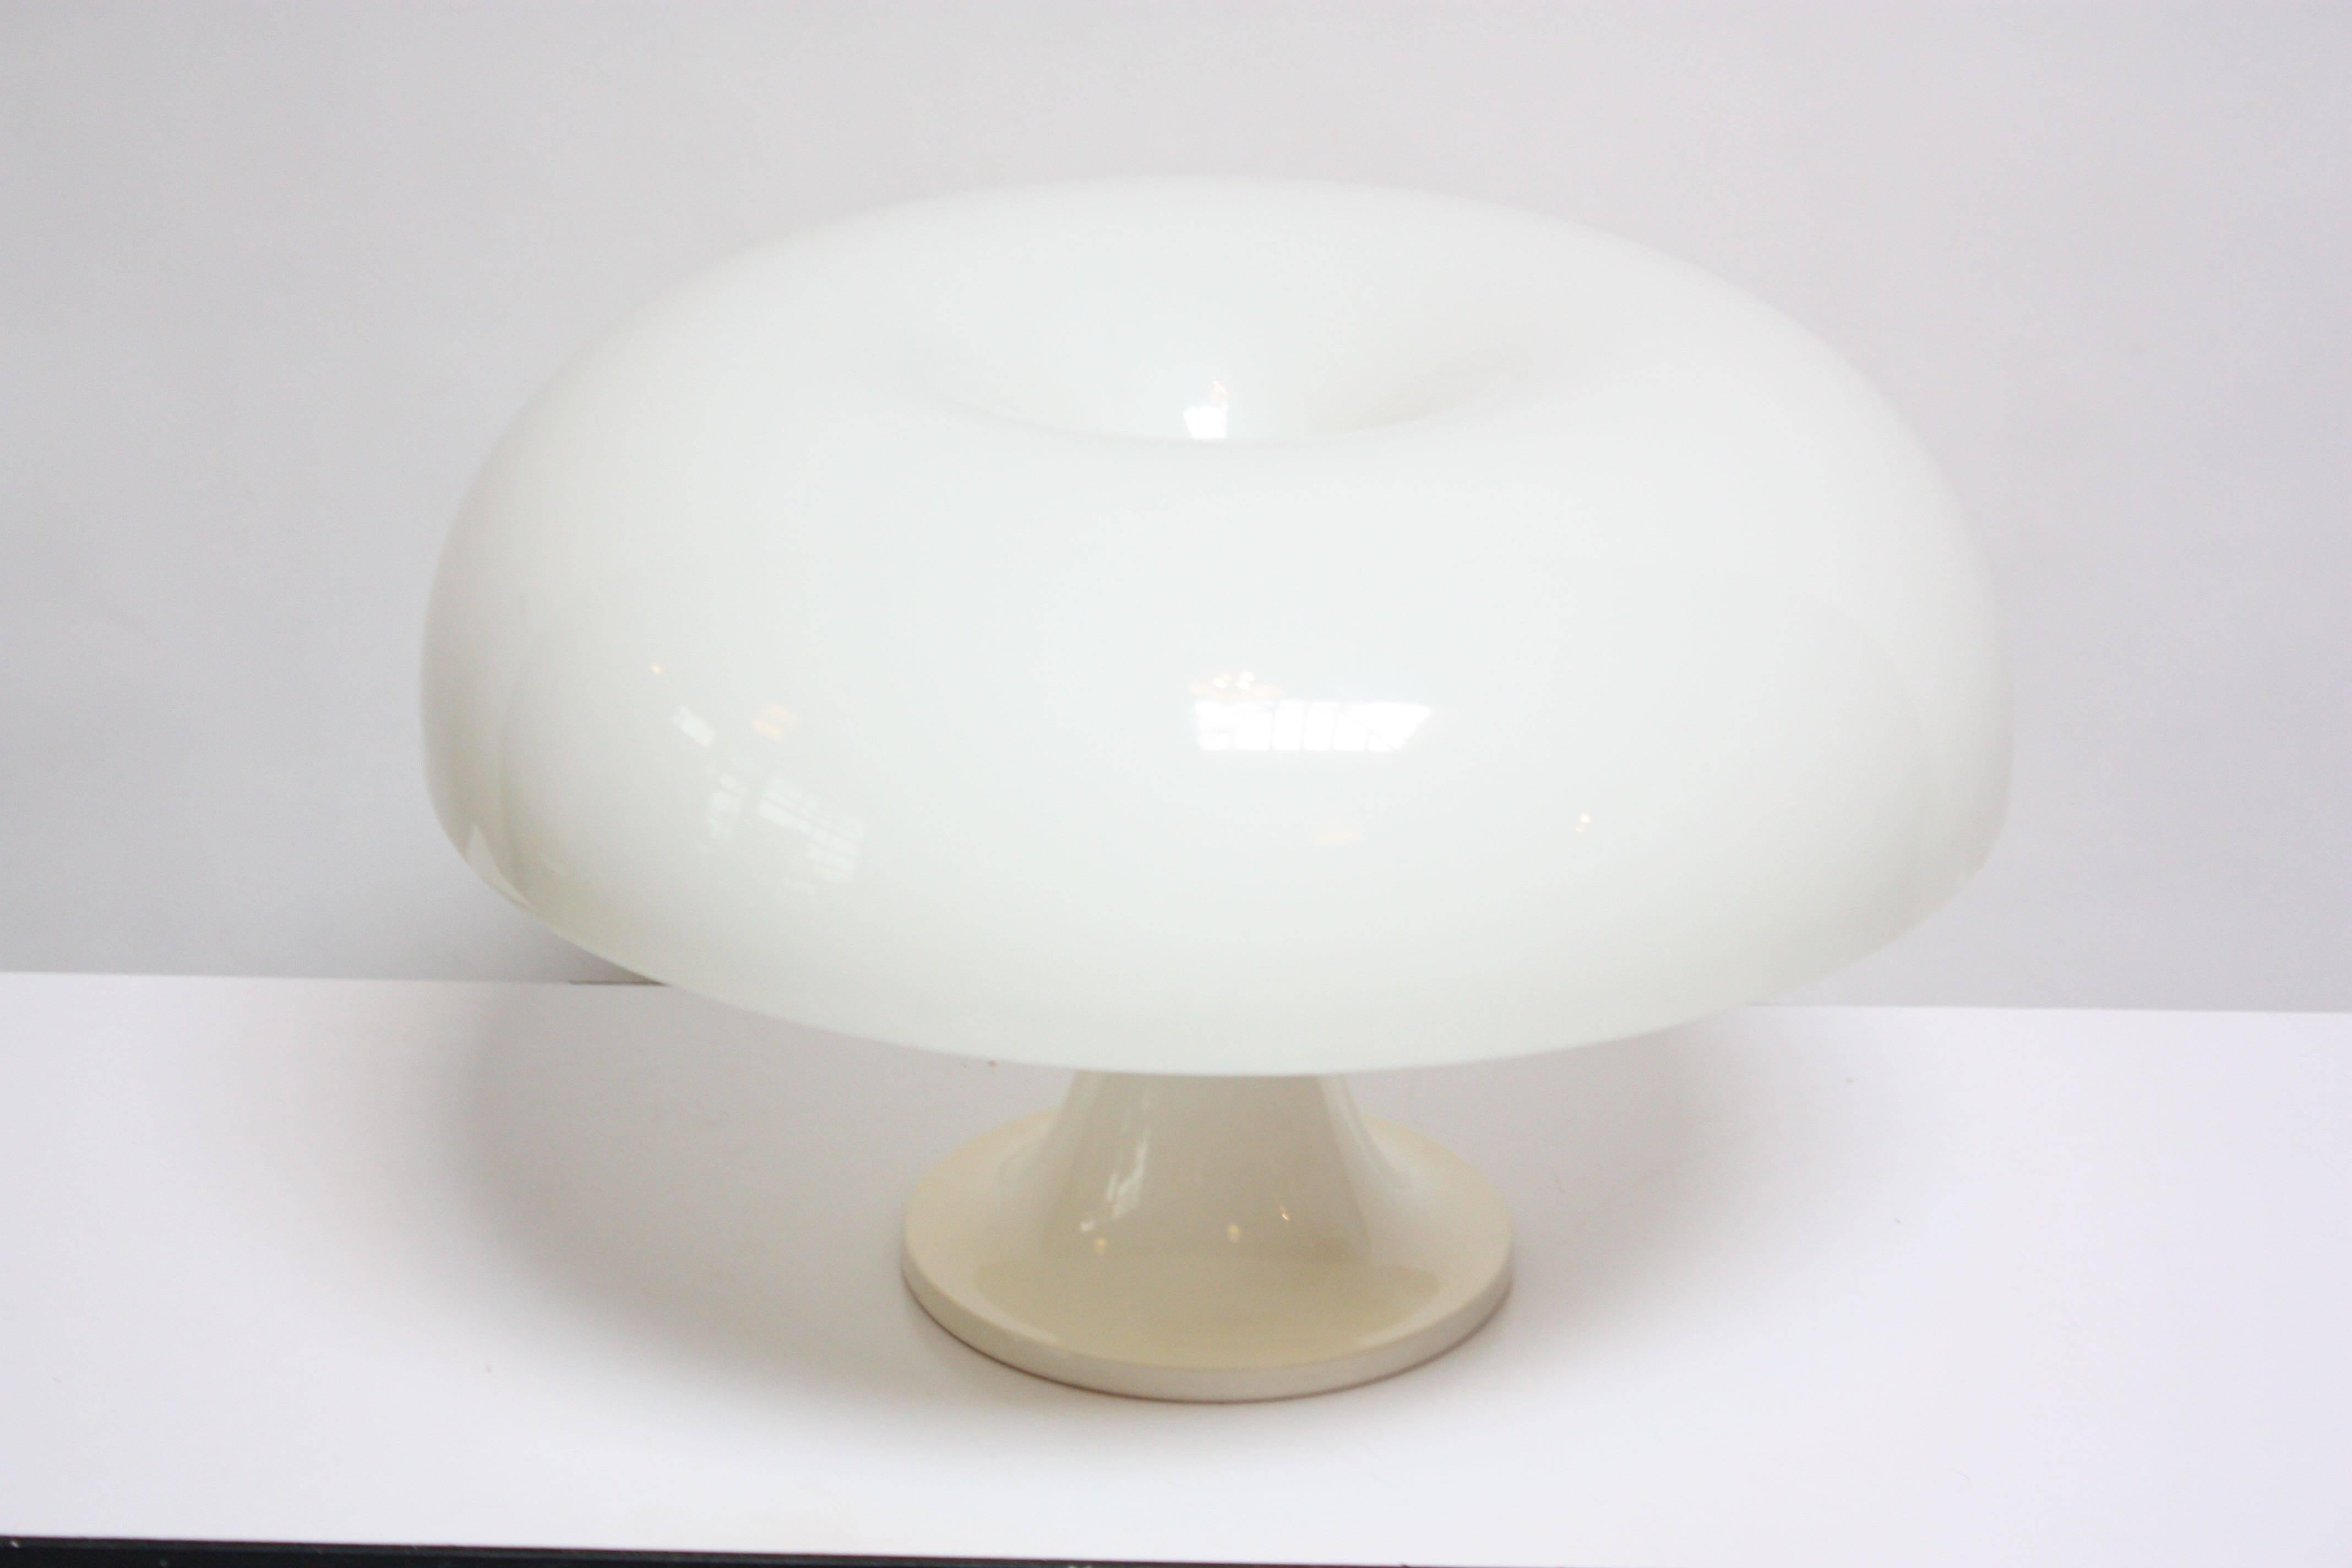 Early example (late 1960s) 'Nesso' table lamp designed by Giancarlo Mattioli and Gruppo Architetti Urbanisti for Artemide. Unlike the later re-issues of this iconic lamp, this example was formed using ABS Thermoplastic Injection molding